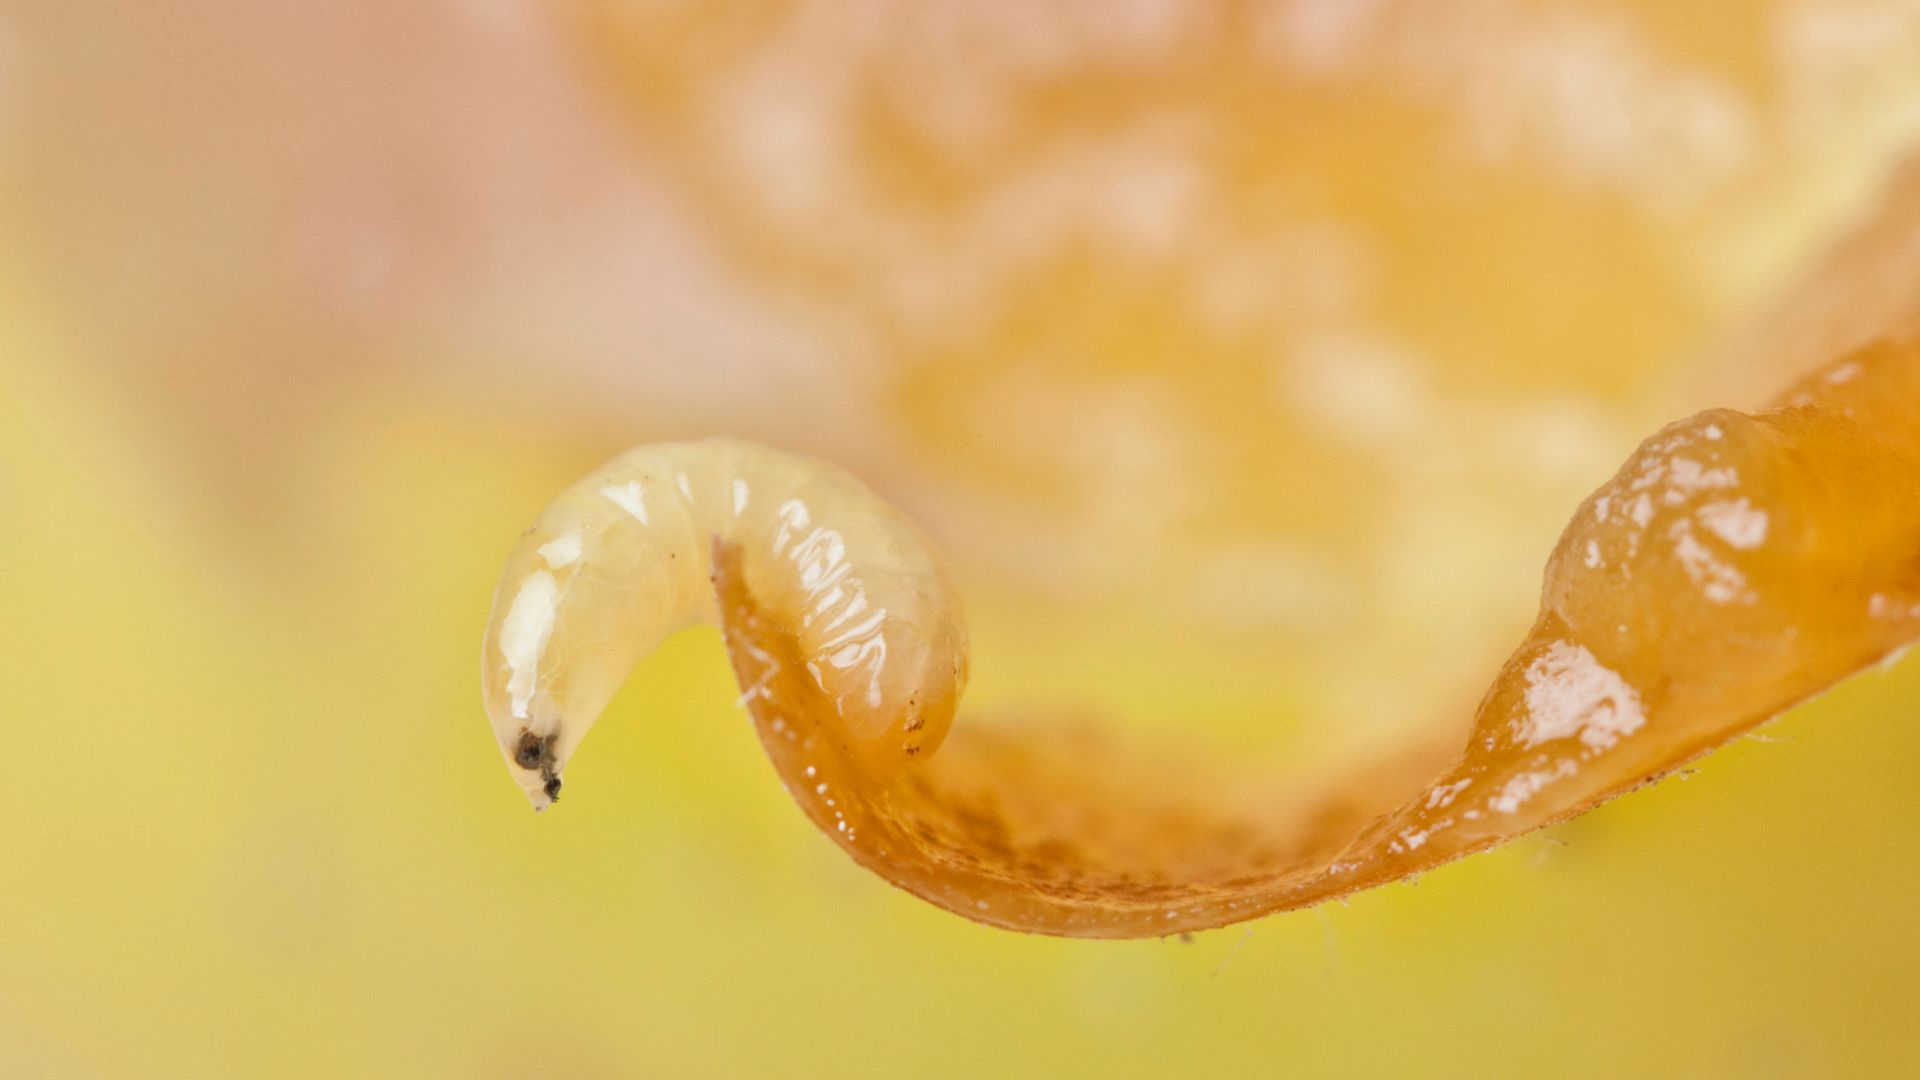 An image of fruit fly larva.